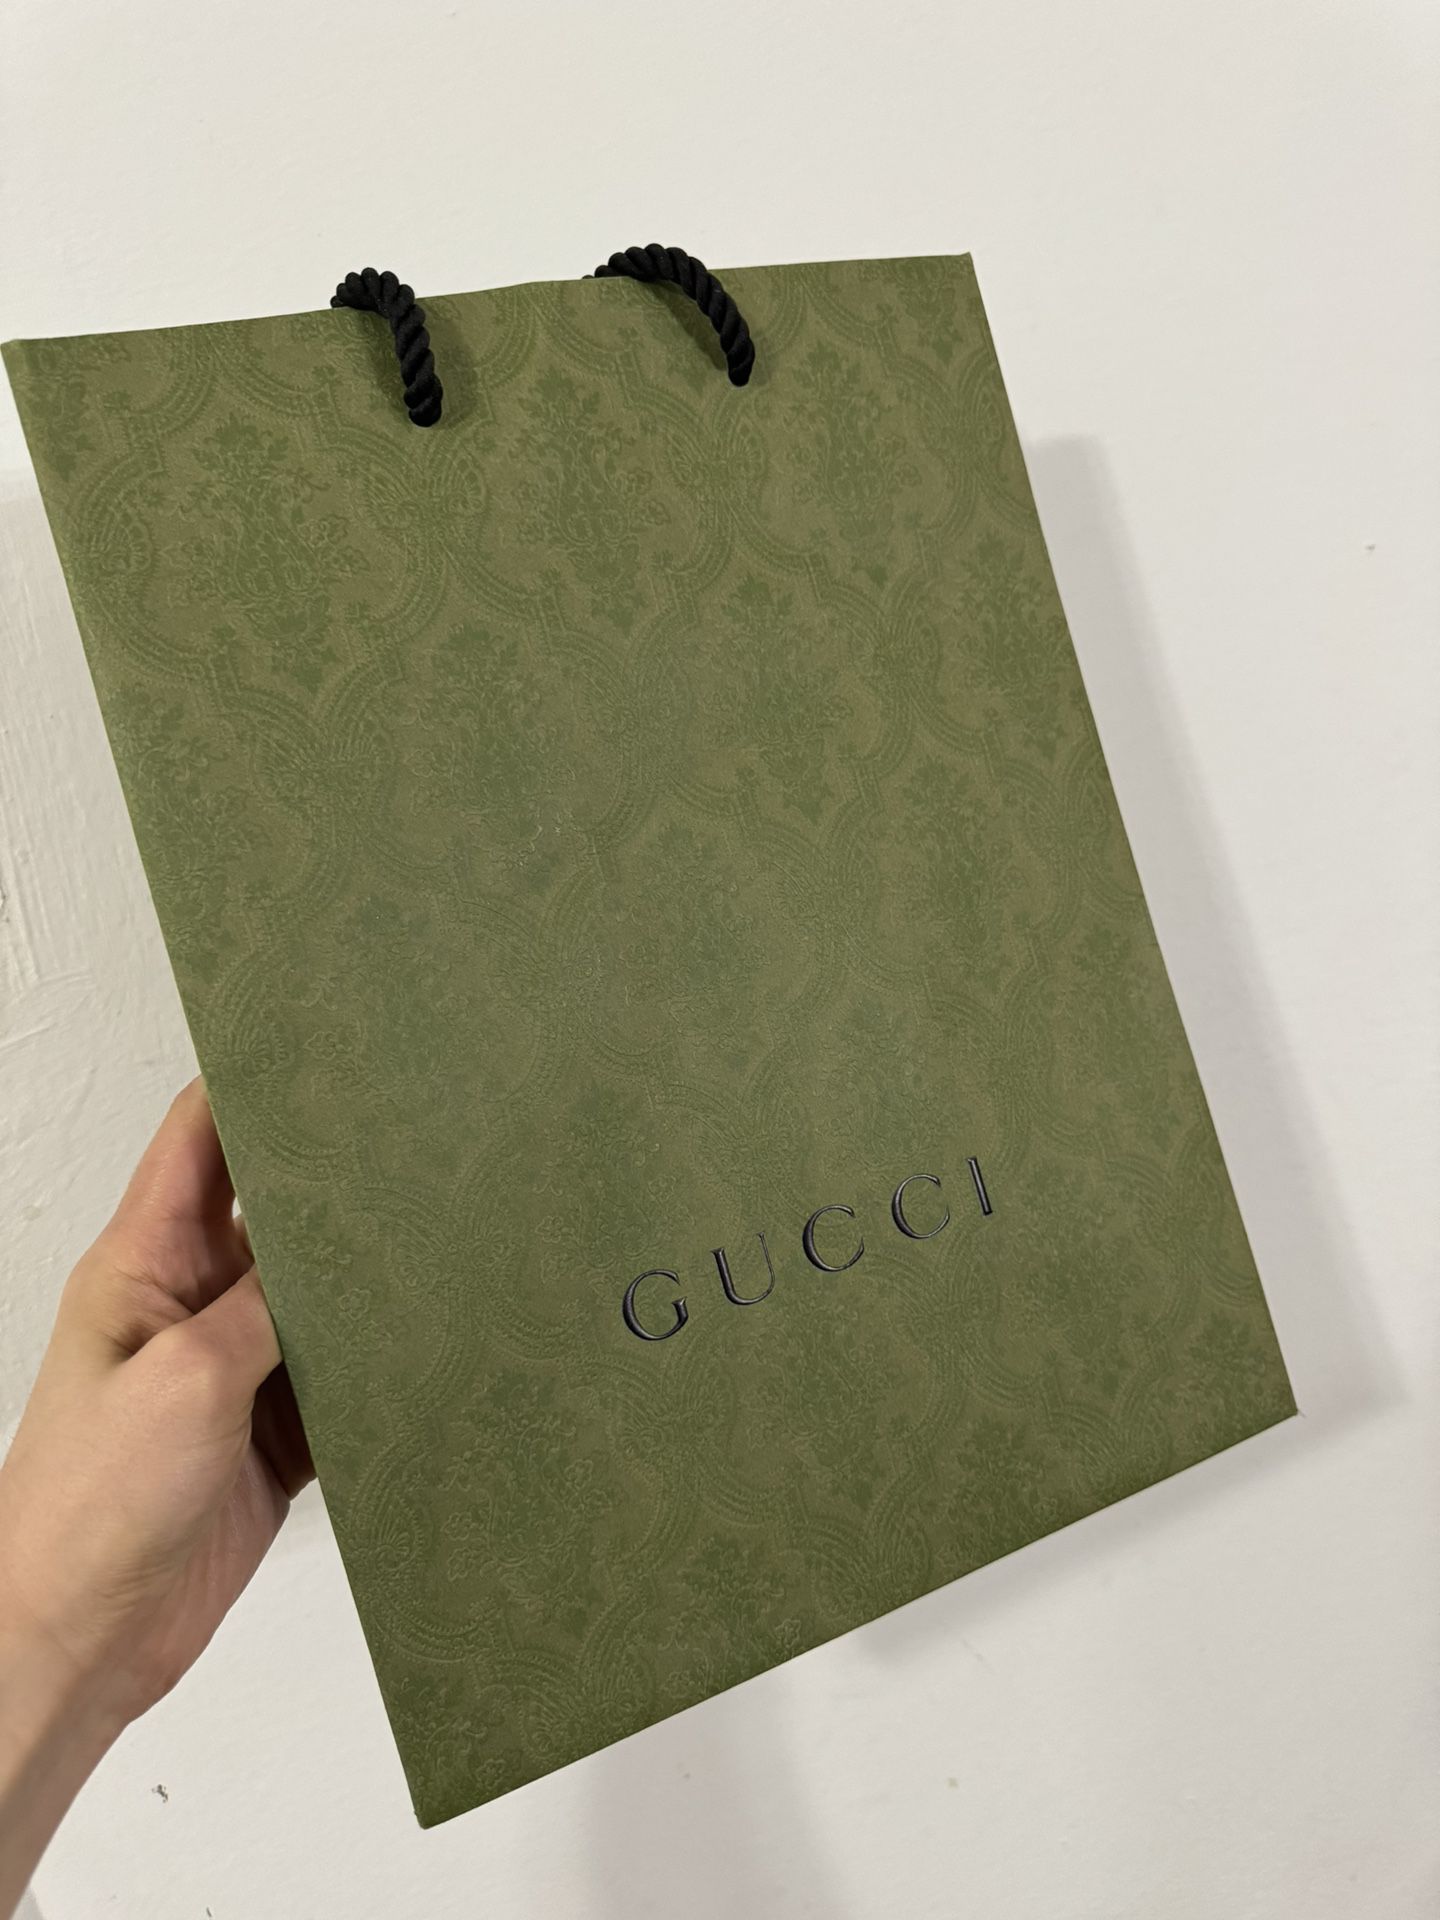 Authentic Gucci Gift Bag 